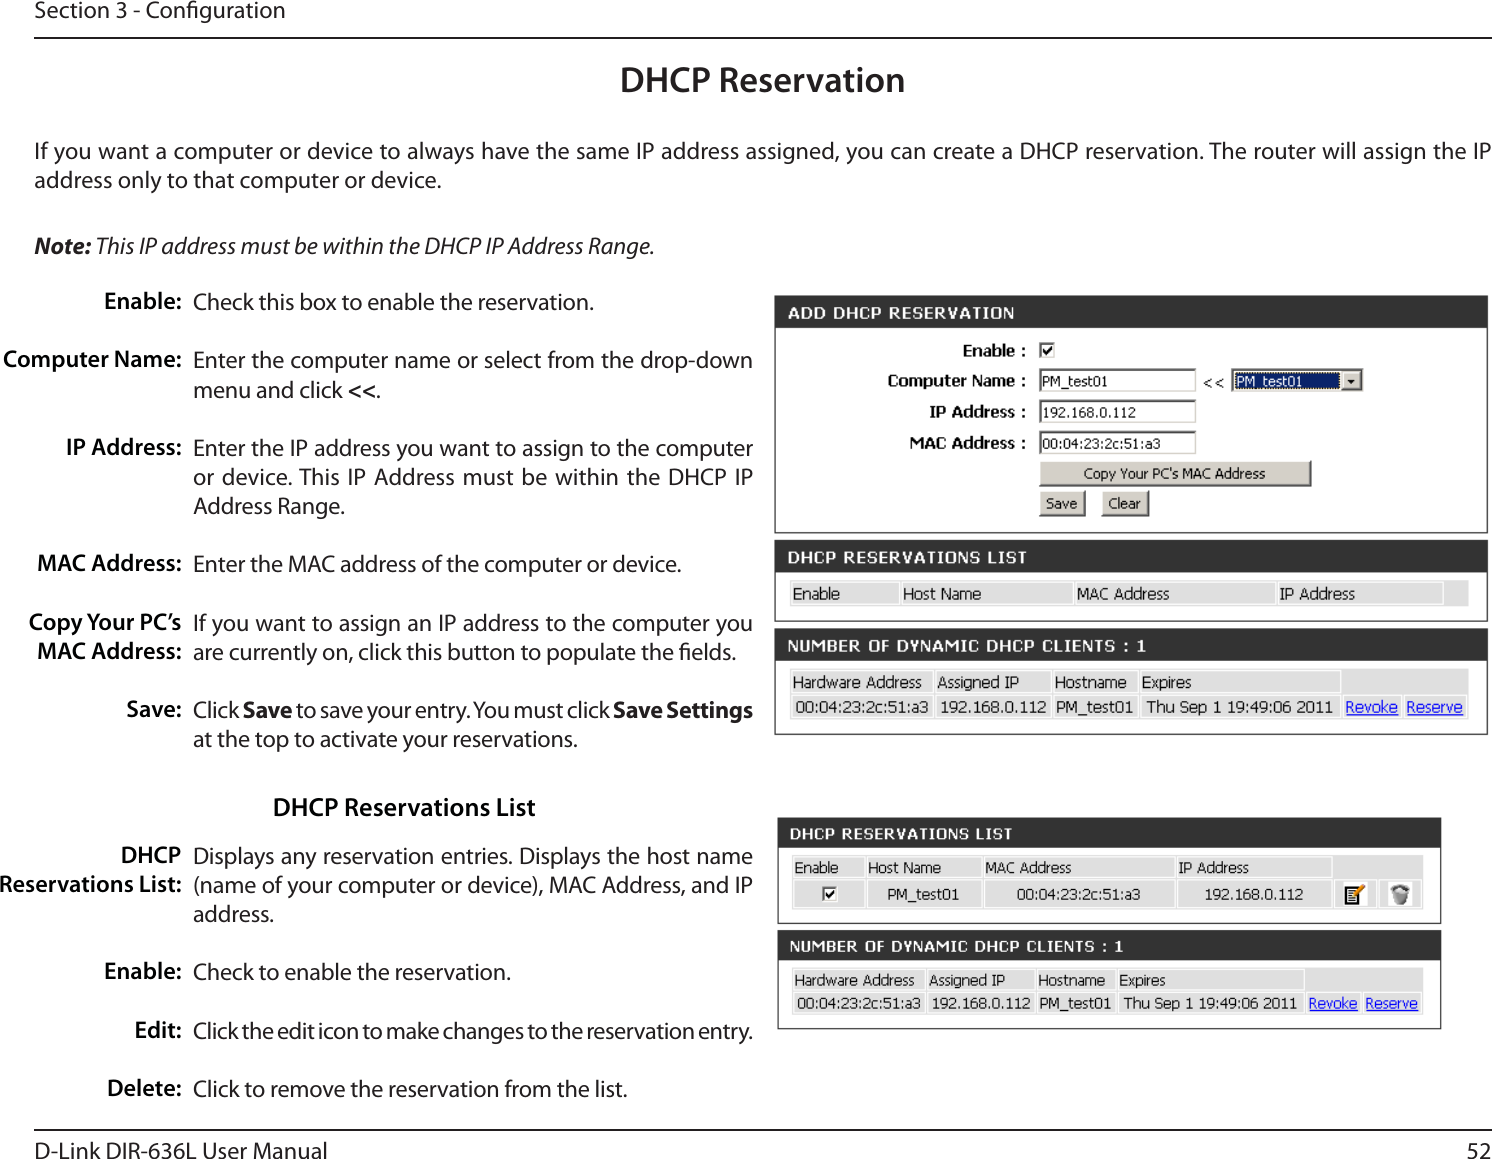 52D-Link DIR-636L User ManualSection 3 - CongurationDHCP ReservationIf you want a computer or device to always have the same IP address assigned, you can create a DHCP reservation. The router will assign the IP address only to that computer or device. Note: This IP address must be within the DHCP IP Address Range.Check this box to enable the reservation.Enter the computer name or select from the drop-down menu and click &lt;&lt;.Enter the IP address you want to assign to the computer or device. This IP Address must be within the DHCP IP Address Range.Enter the MAC address of the computer or device.If you want to assign an IP address to the computer you are currently on, click this button to populate the elds. Click Save to save your entry. You must click Save Settings at the top to activate your reservations. Displays any reservation entries. Displays the host name (name of your computer or device), MAC Address, and IP address.Check to enable the reservation.Click the edit icon to make changes to the reservation entry.Click to remove the reservation from the list.Enable:Computer Name:IP Address:MAC Address:Copy Your PC’s MAC Address:Save:DHCP Reservations List:Enable:Edit:Delete:DHCP Reservations List